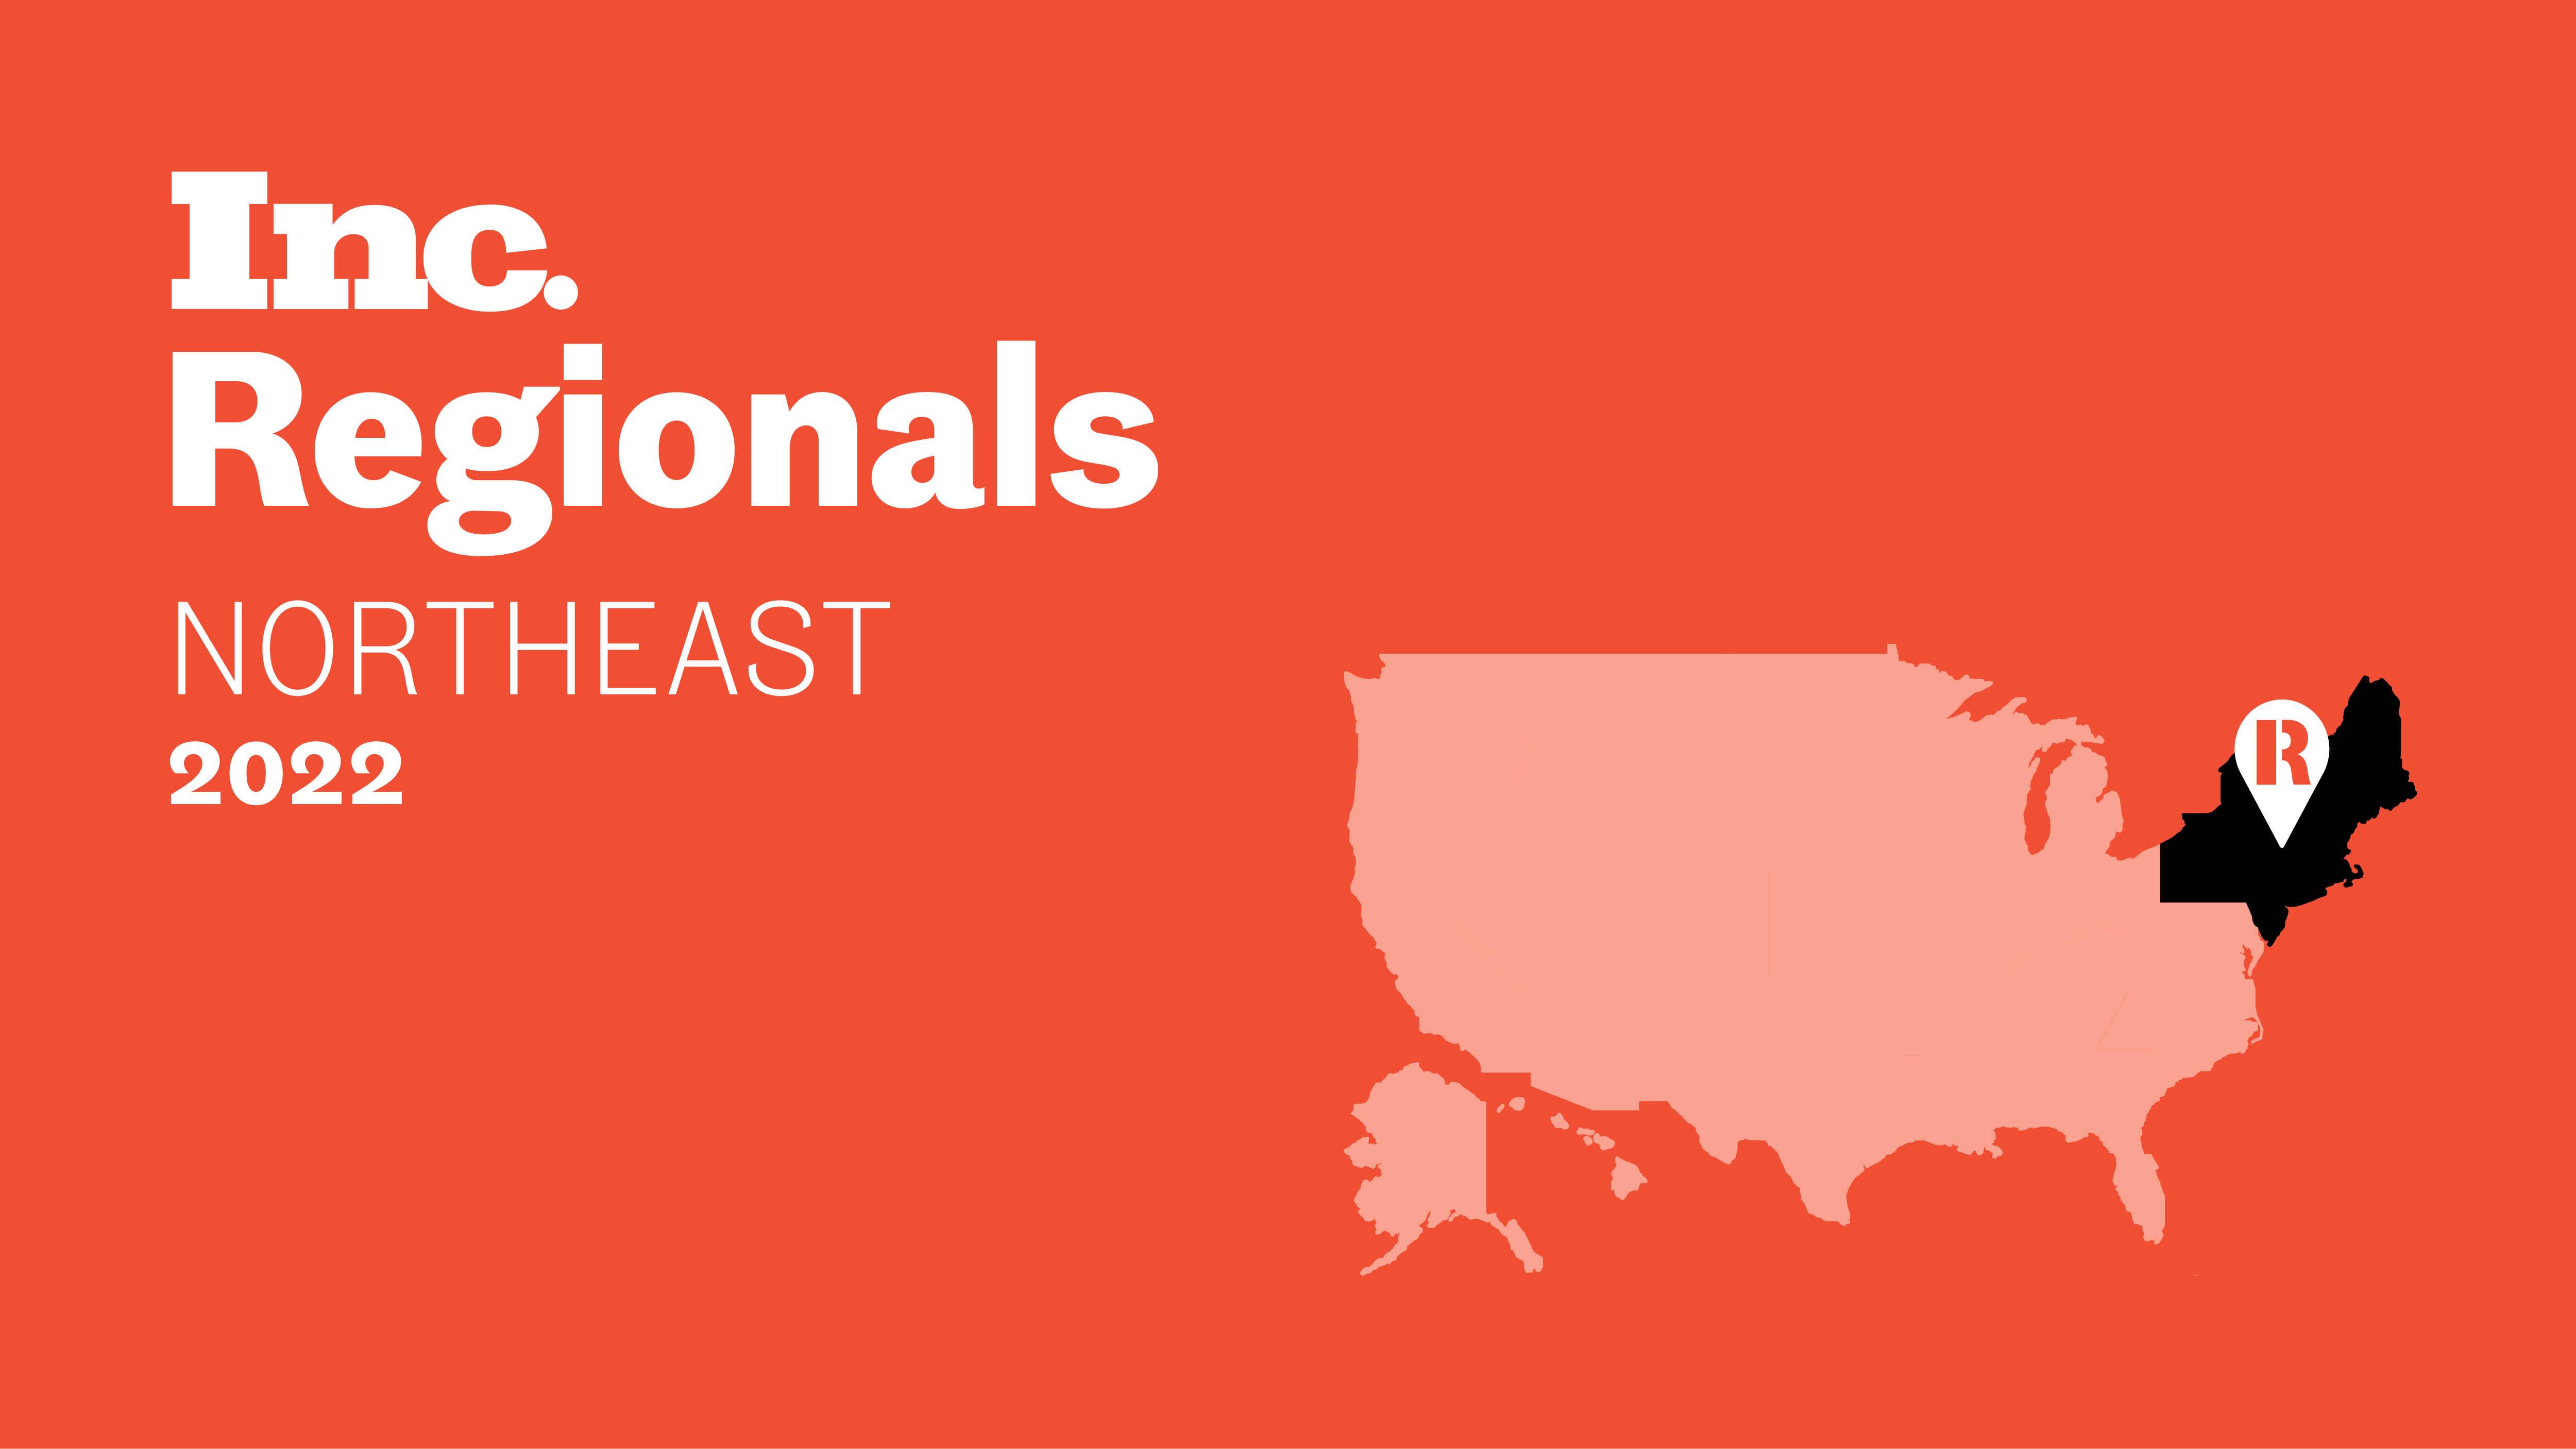 PSA has ranked No. 105 on this year's Inc. Regionals Northeast list!